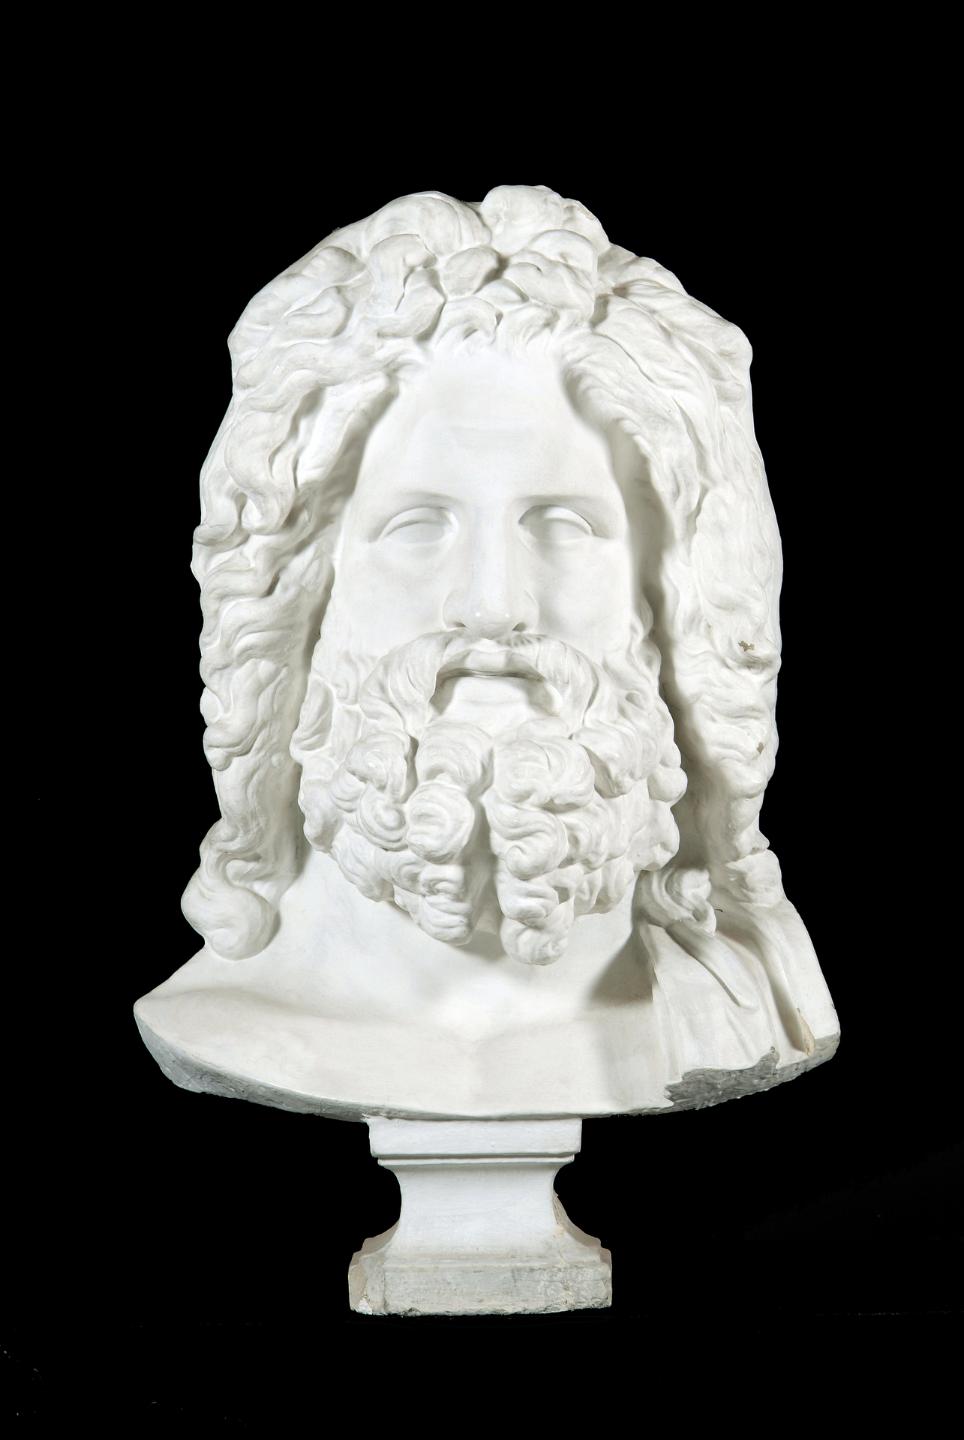 The Jove of Otricoli (The Colossal Head of Jupiter Olympus), c.1816, plaster cast after marble bust in the Musei Vaticani, 87 x 55 x 26 cm. Transferred, Royal Cork Institution, c.1849.